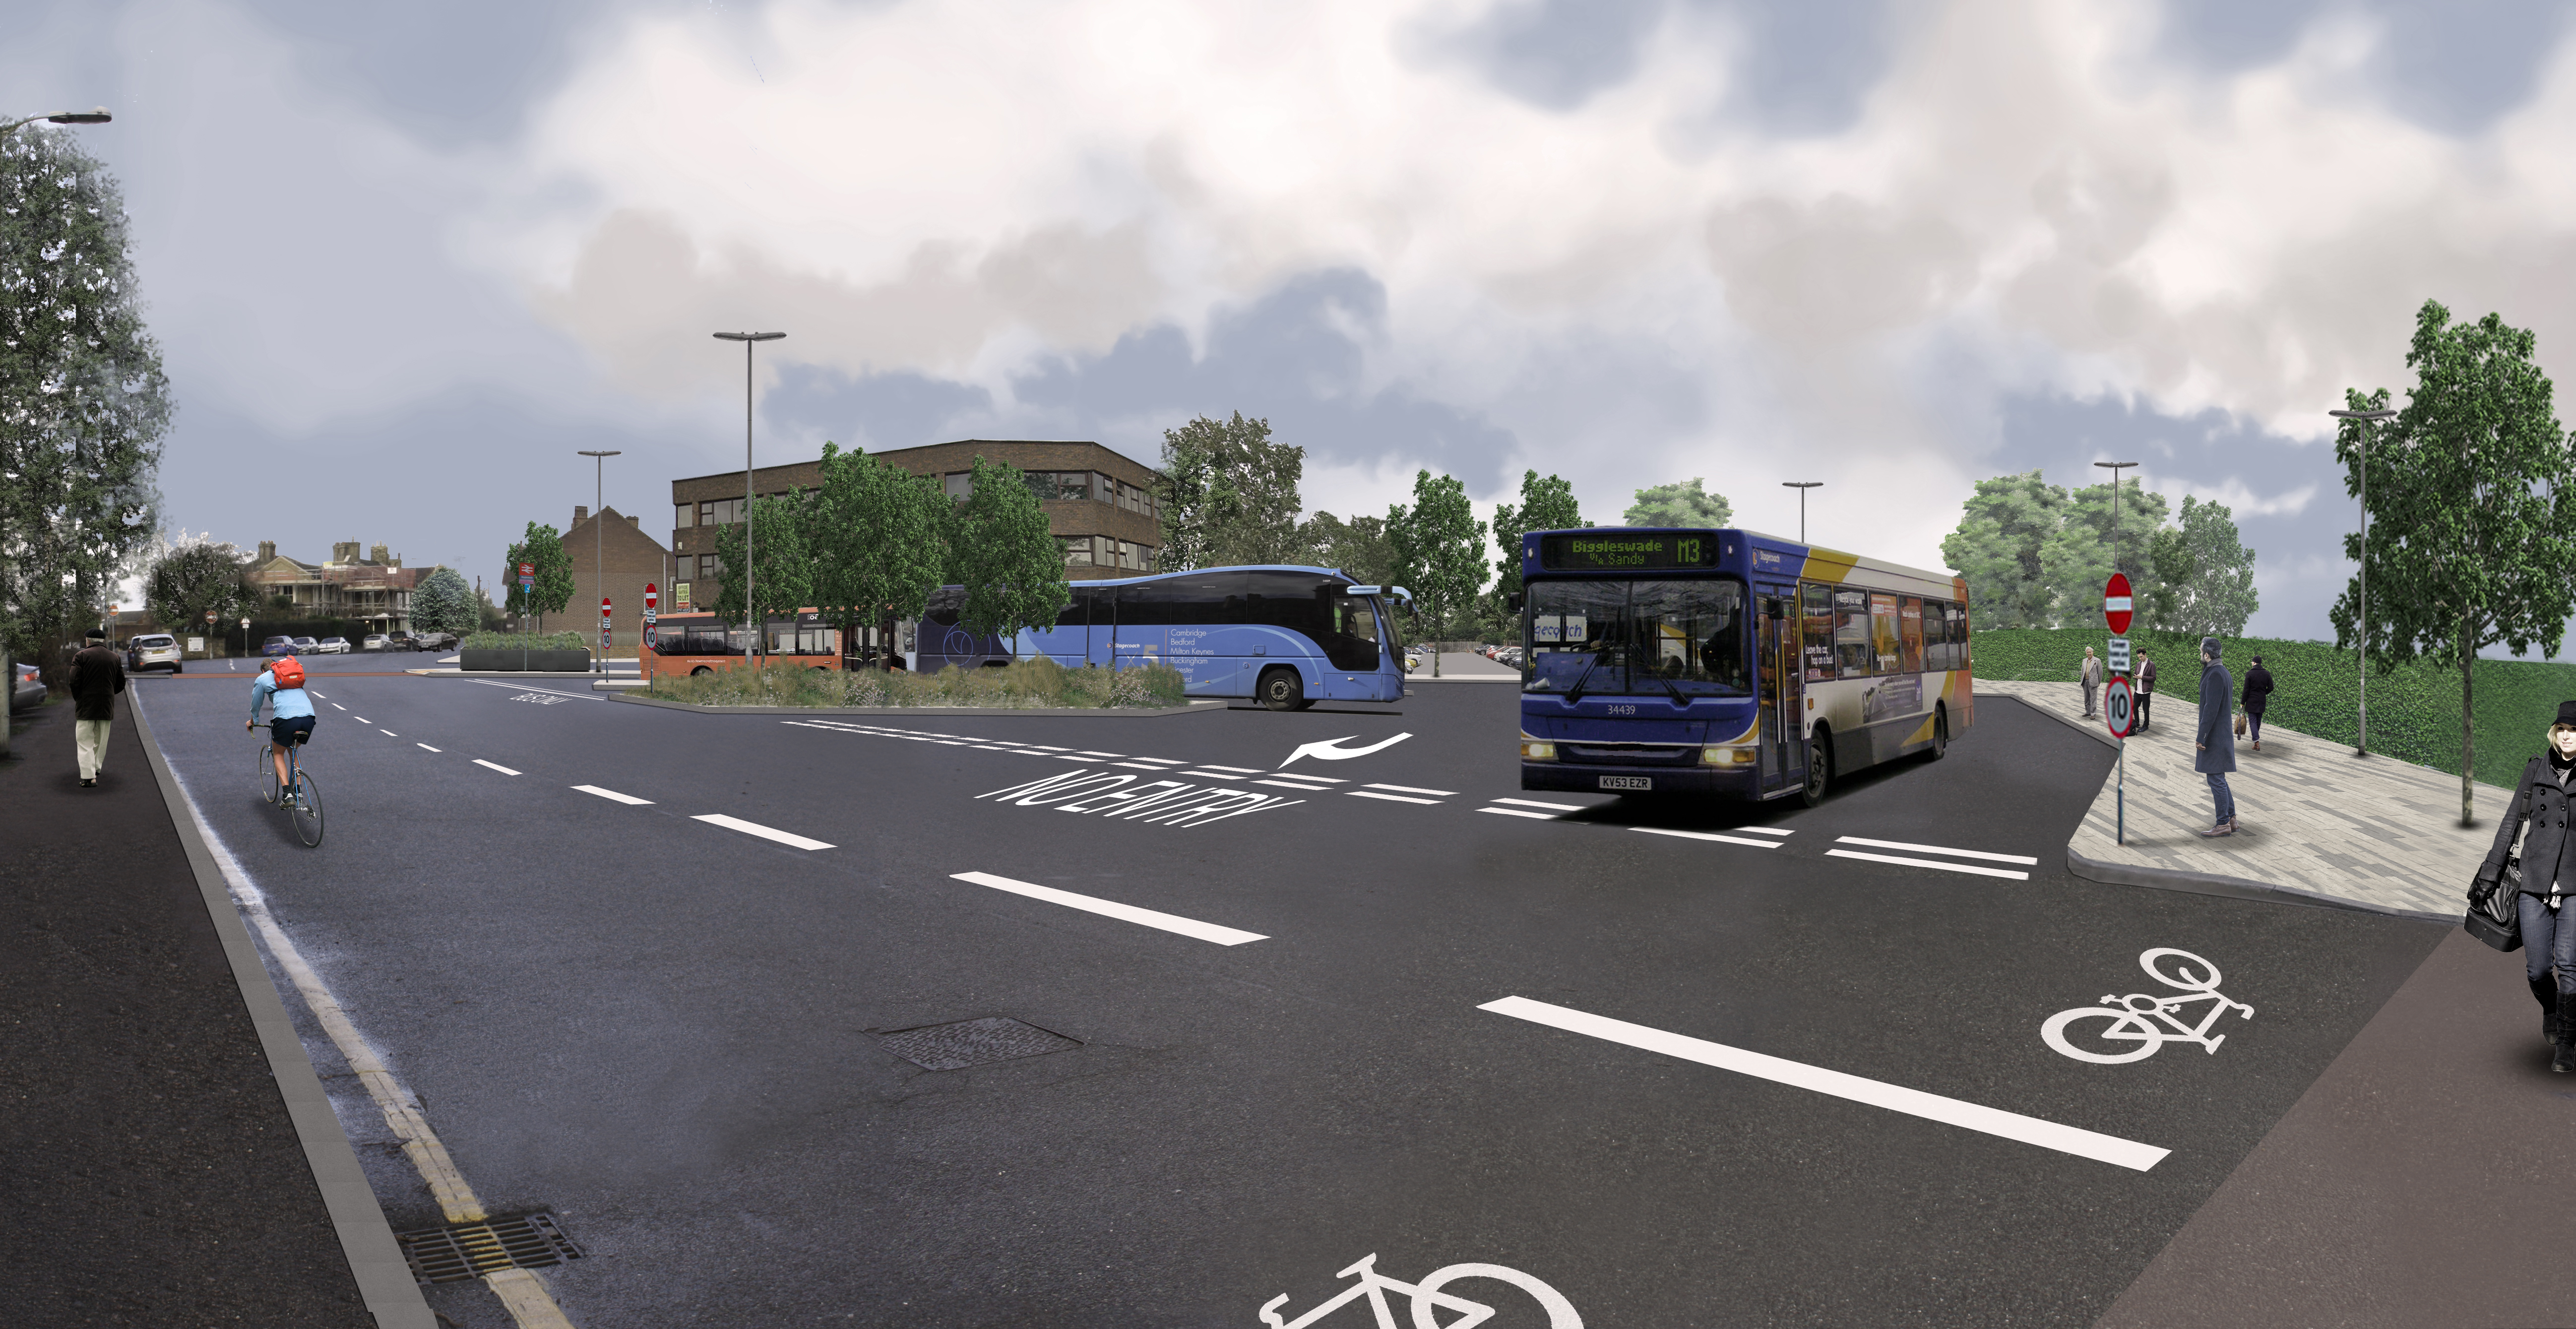 Next arrival in Biggleswade is a new transport interchange